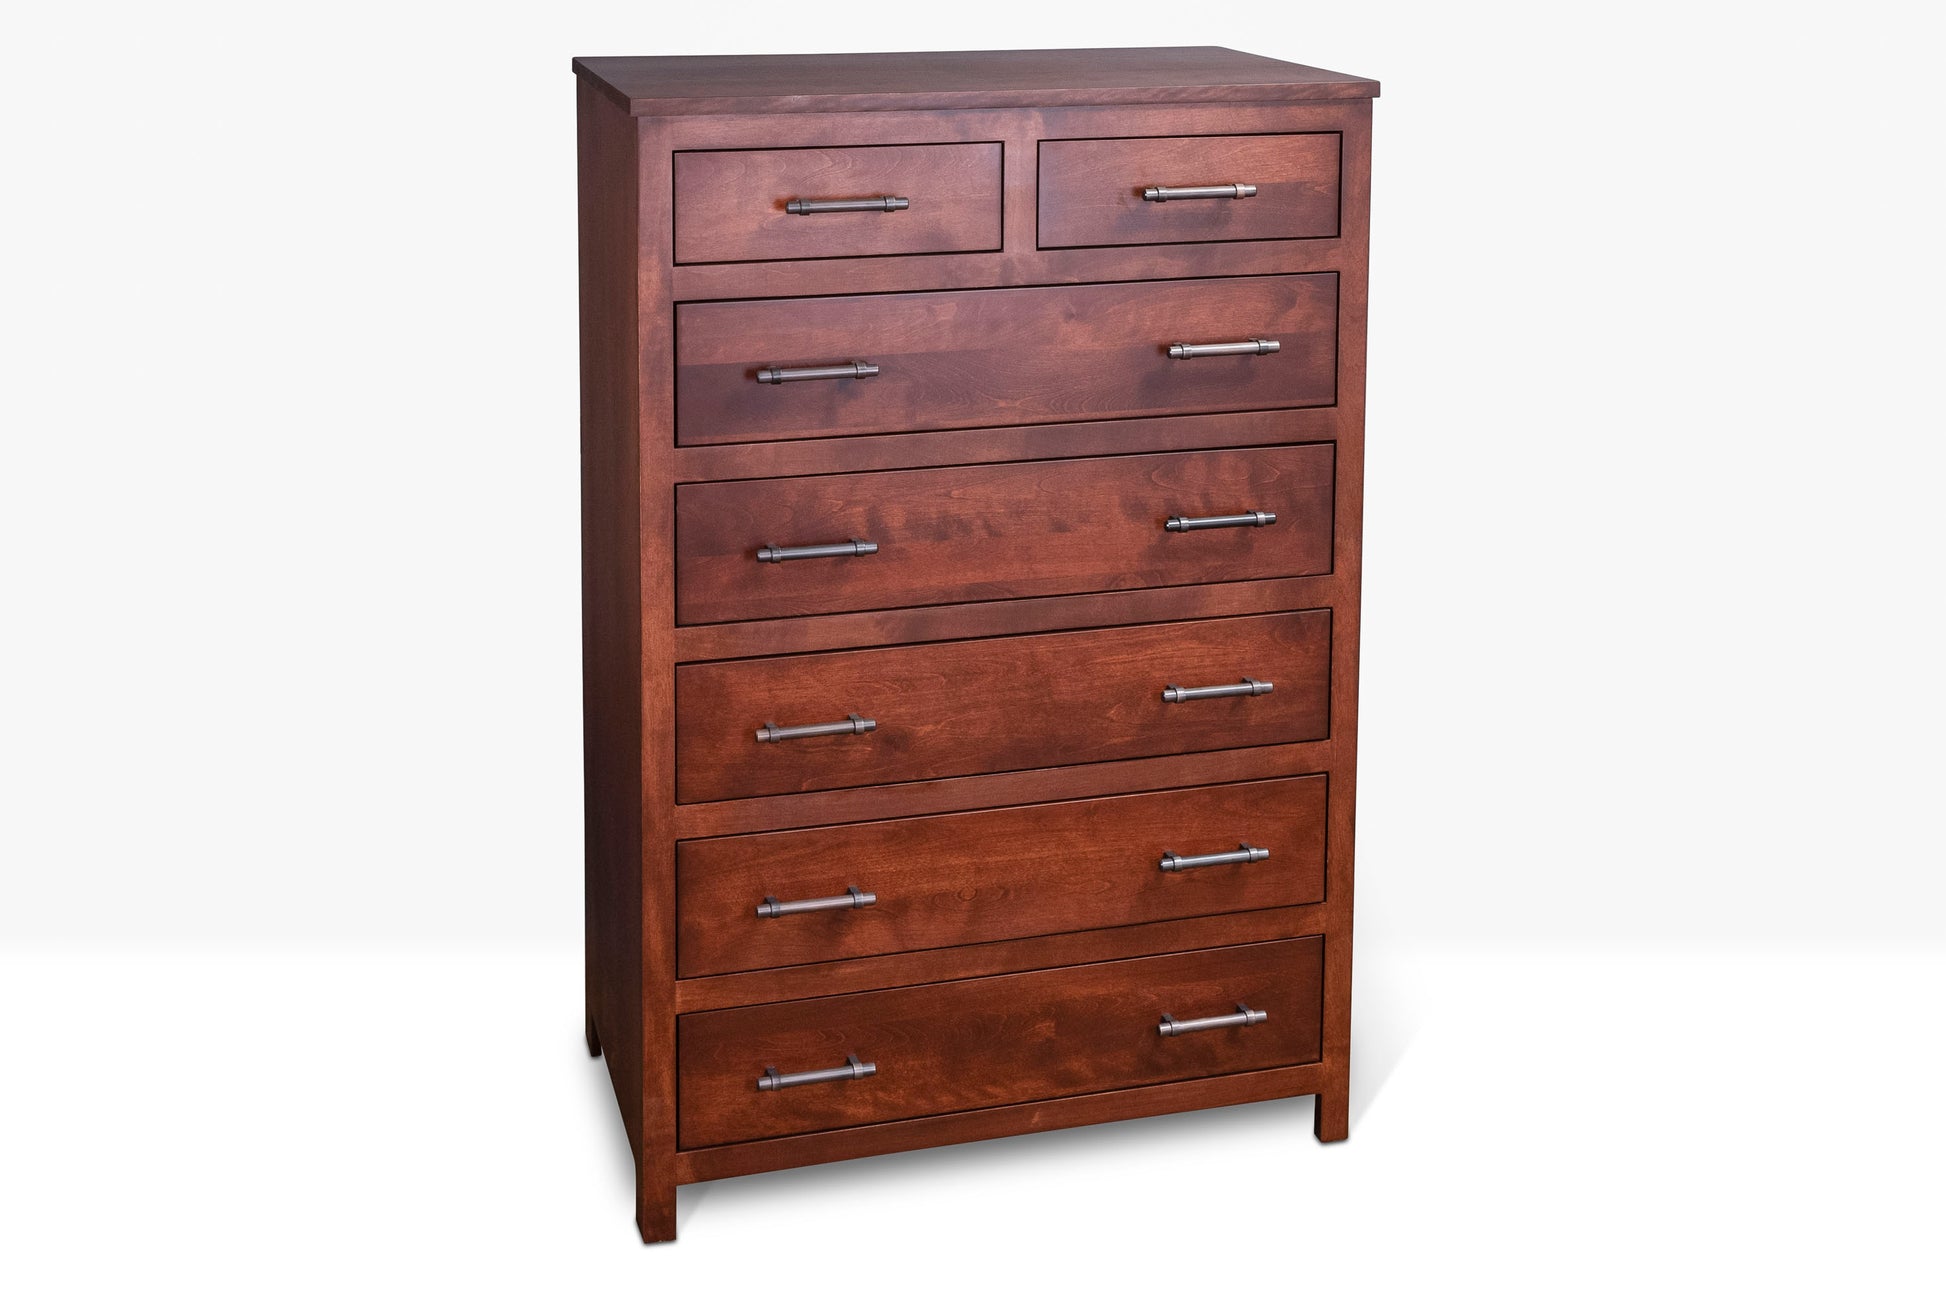 Acadia Tremont Chest with Split Top Drawer shown in cherry finish, with 5 standard drawers and two small drawers.